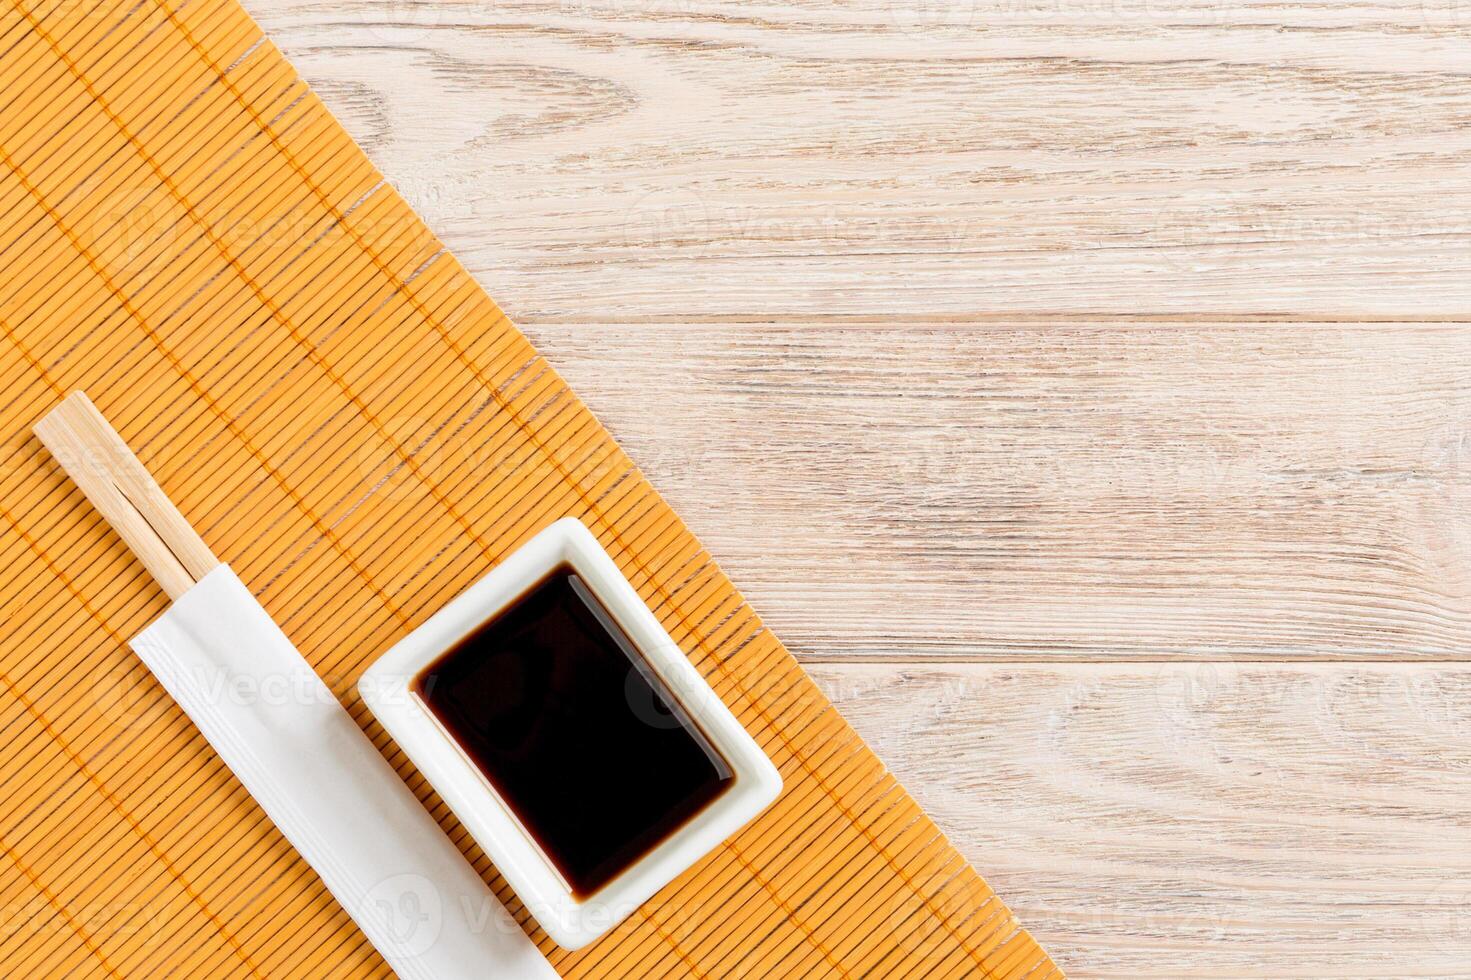 Bamboo mat and soy sauce with sushi chopsticks on wooden table. Top view with copy space background for sushi. Flat lay photo